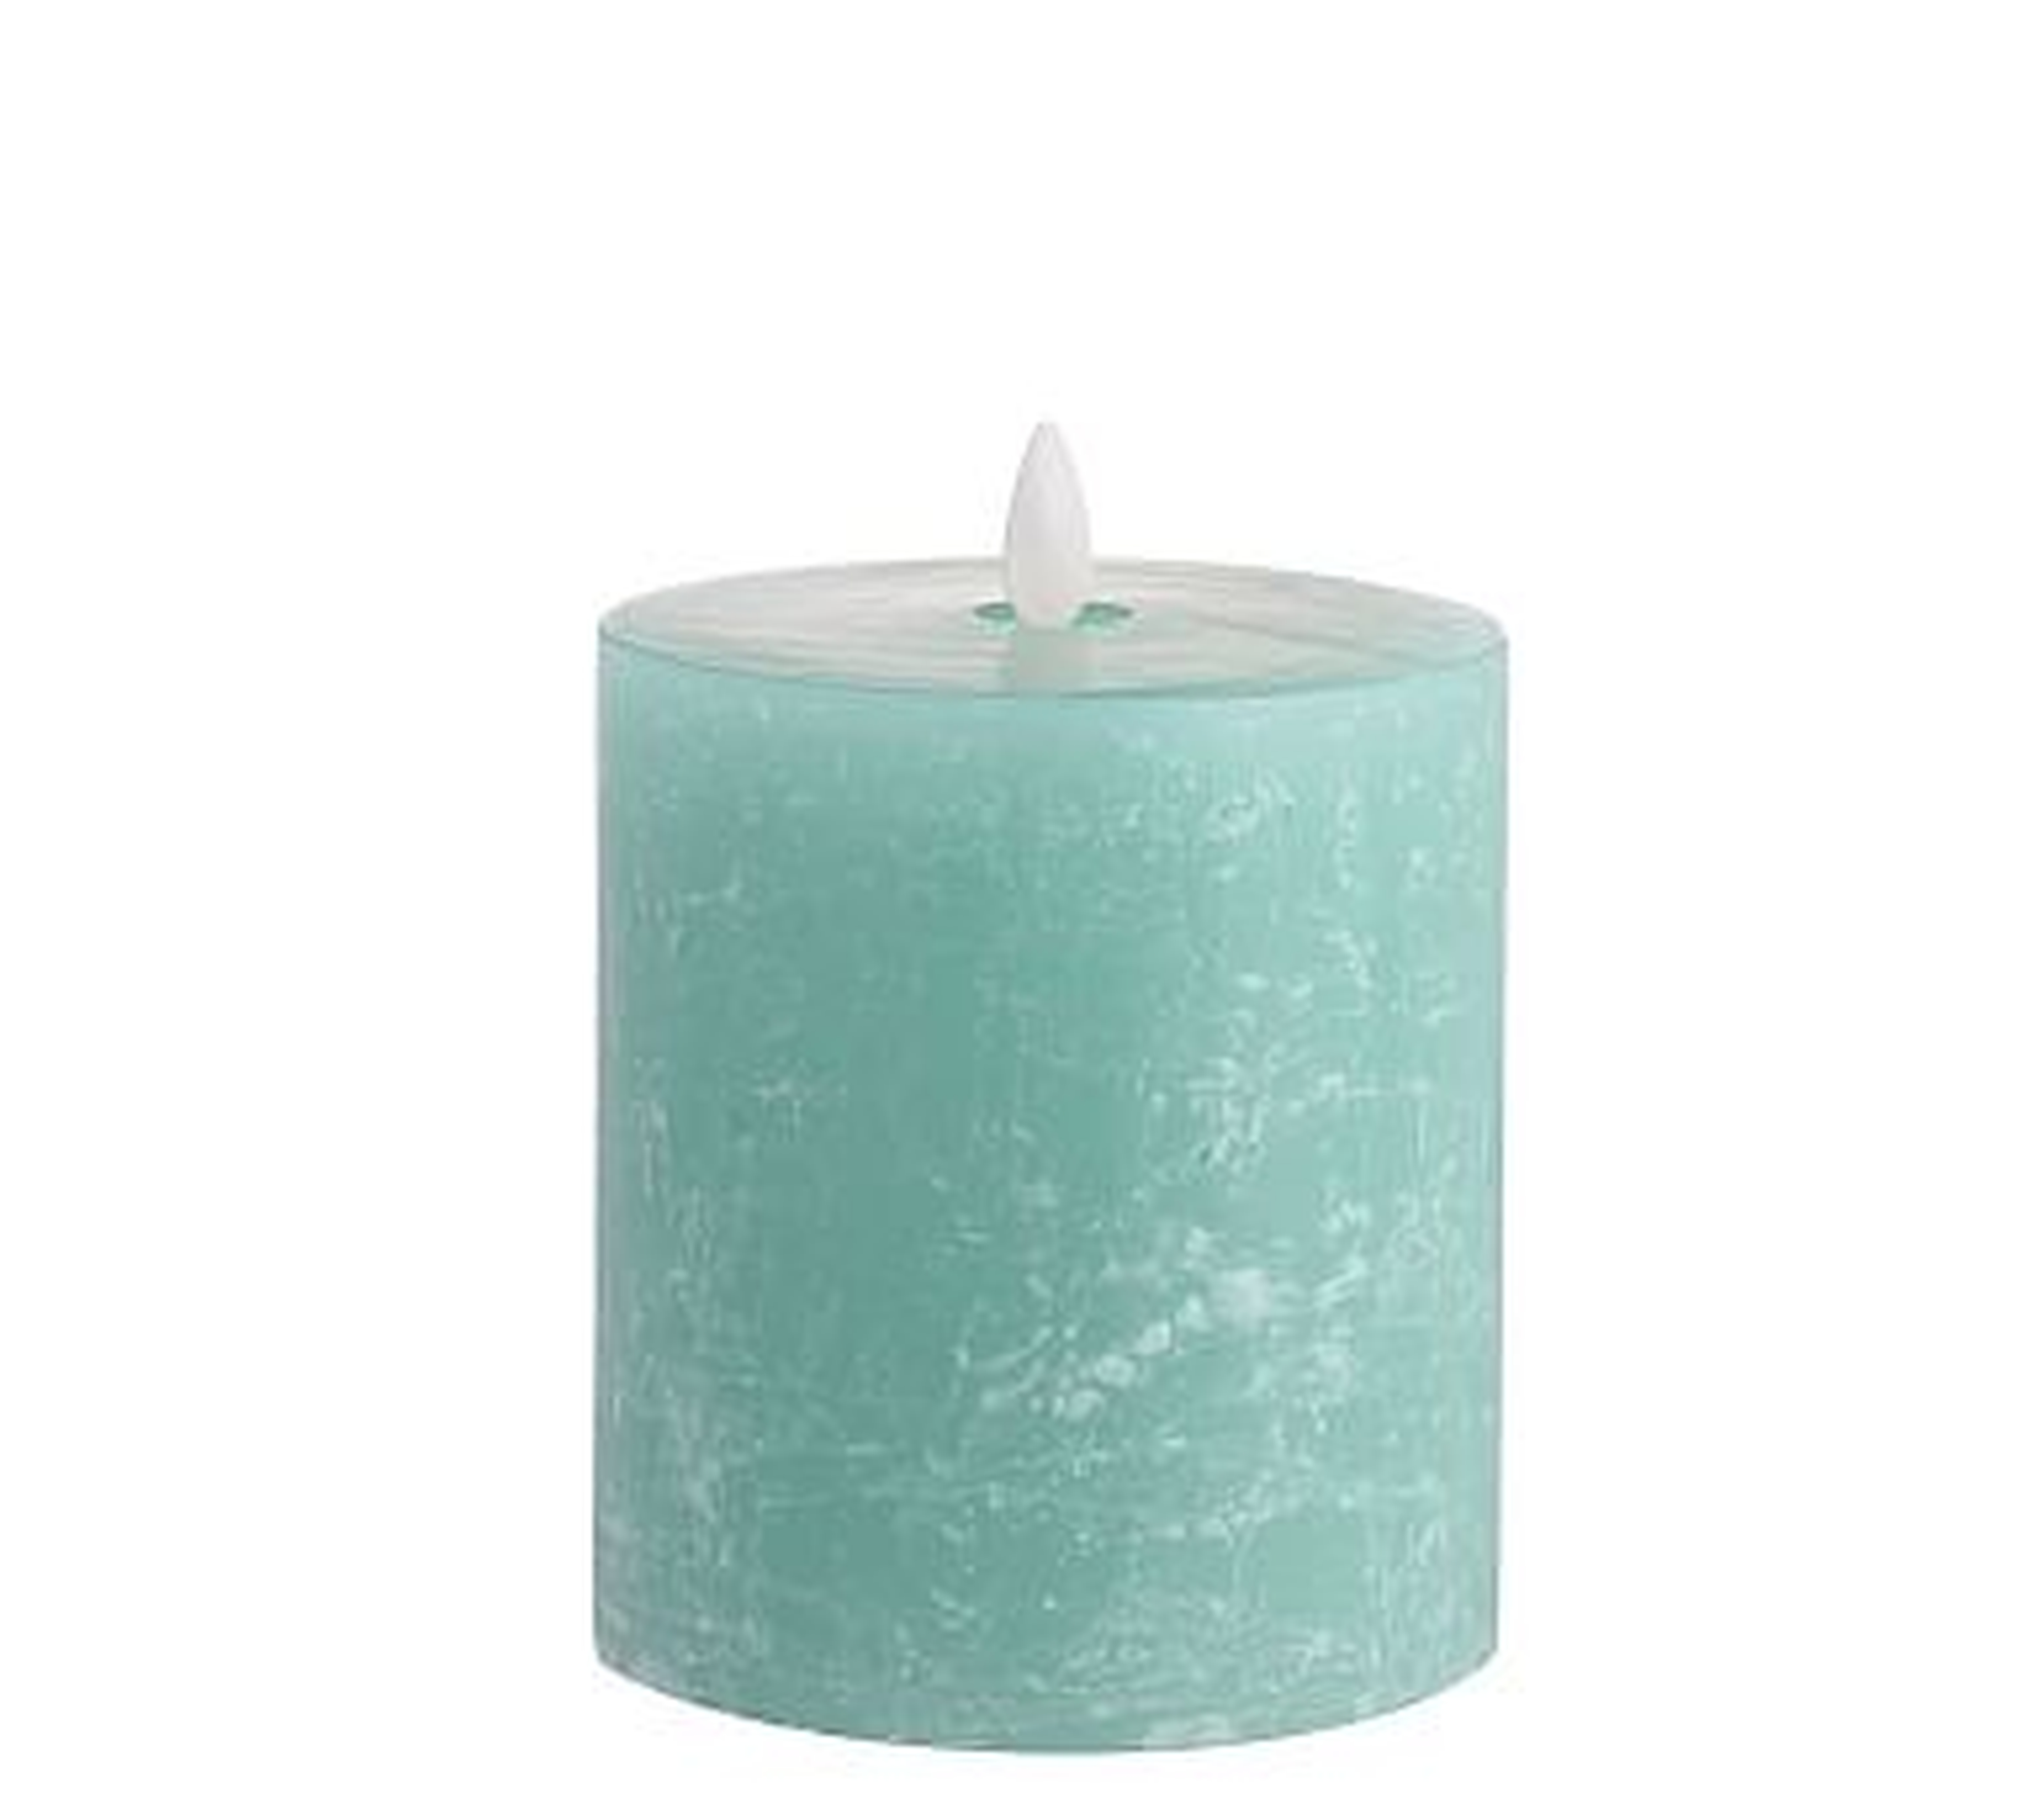 Premium Flicker Flameless Textured Candle, Seaglass, 4x4.5" - Pottery Barn